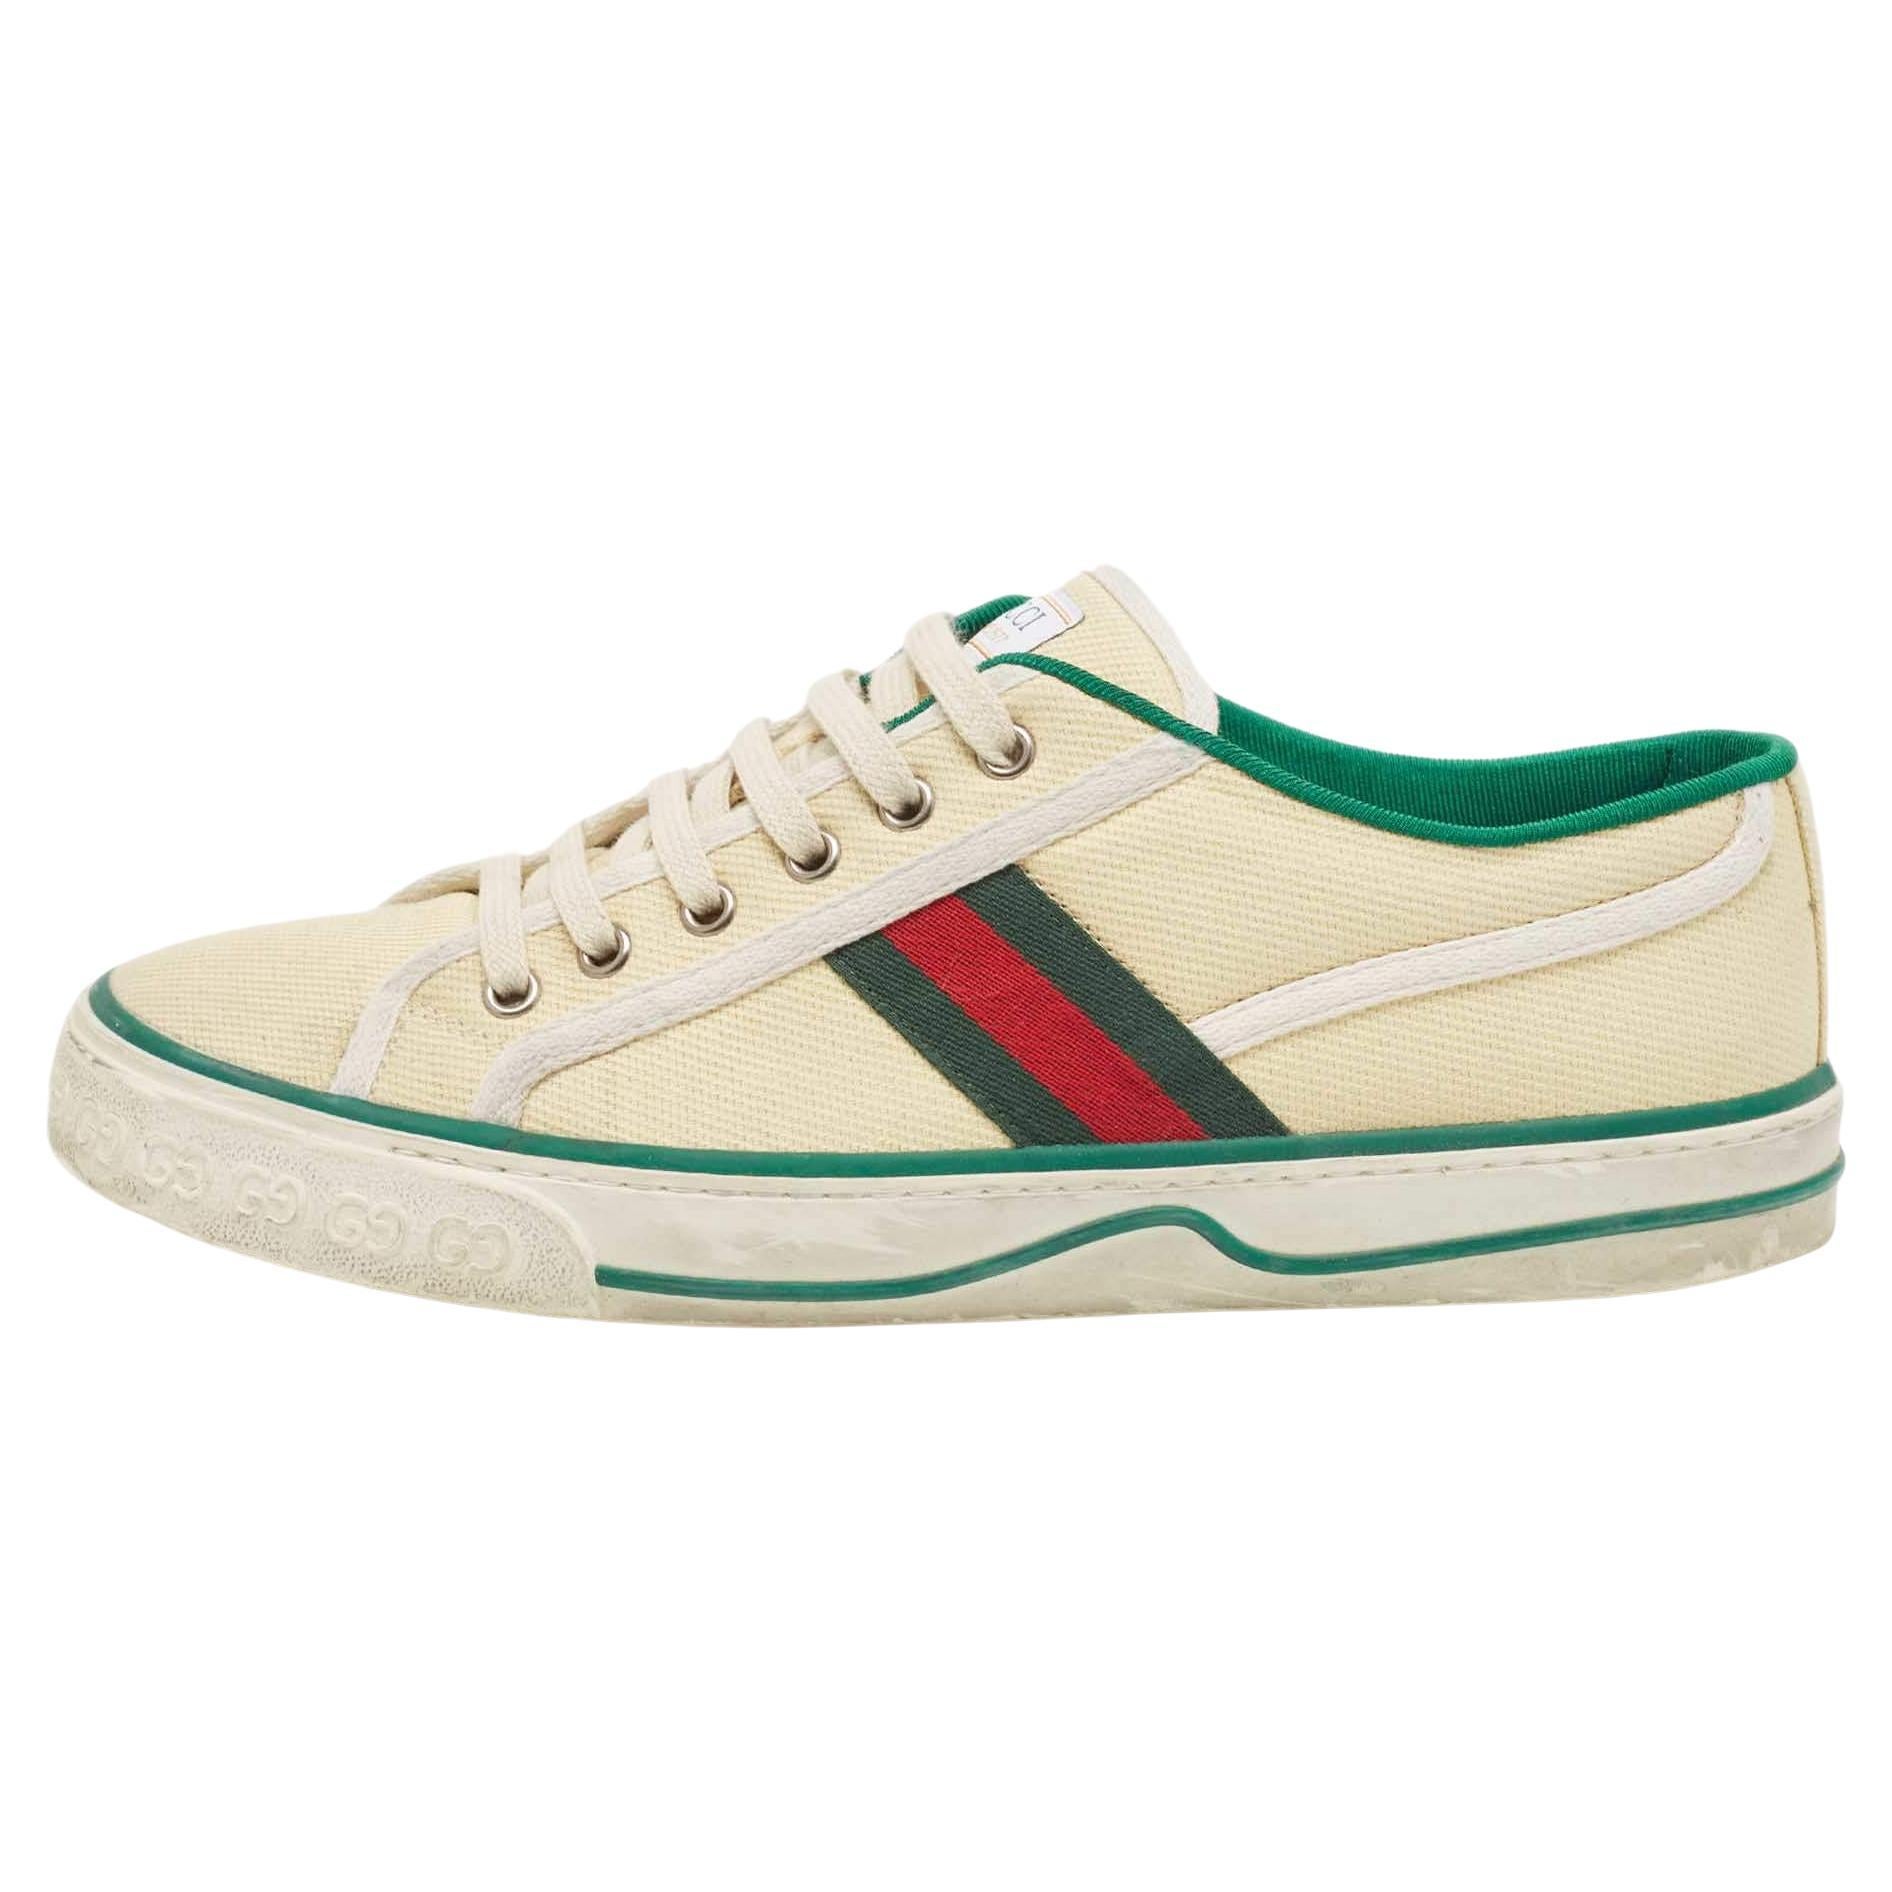 Gucci Cream Canvas Tennis 1977 Sneakers Size 42 For Sale